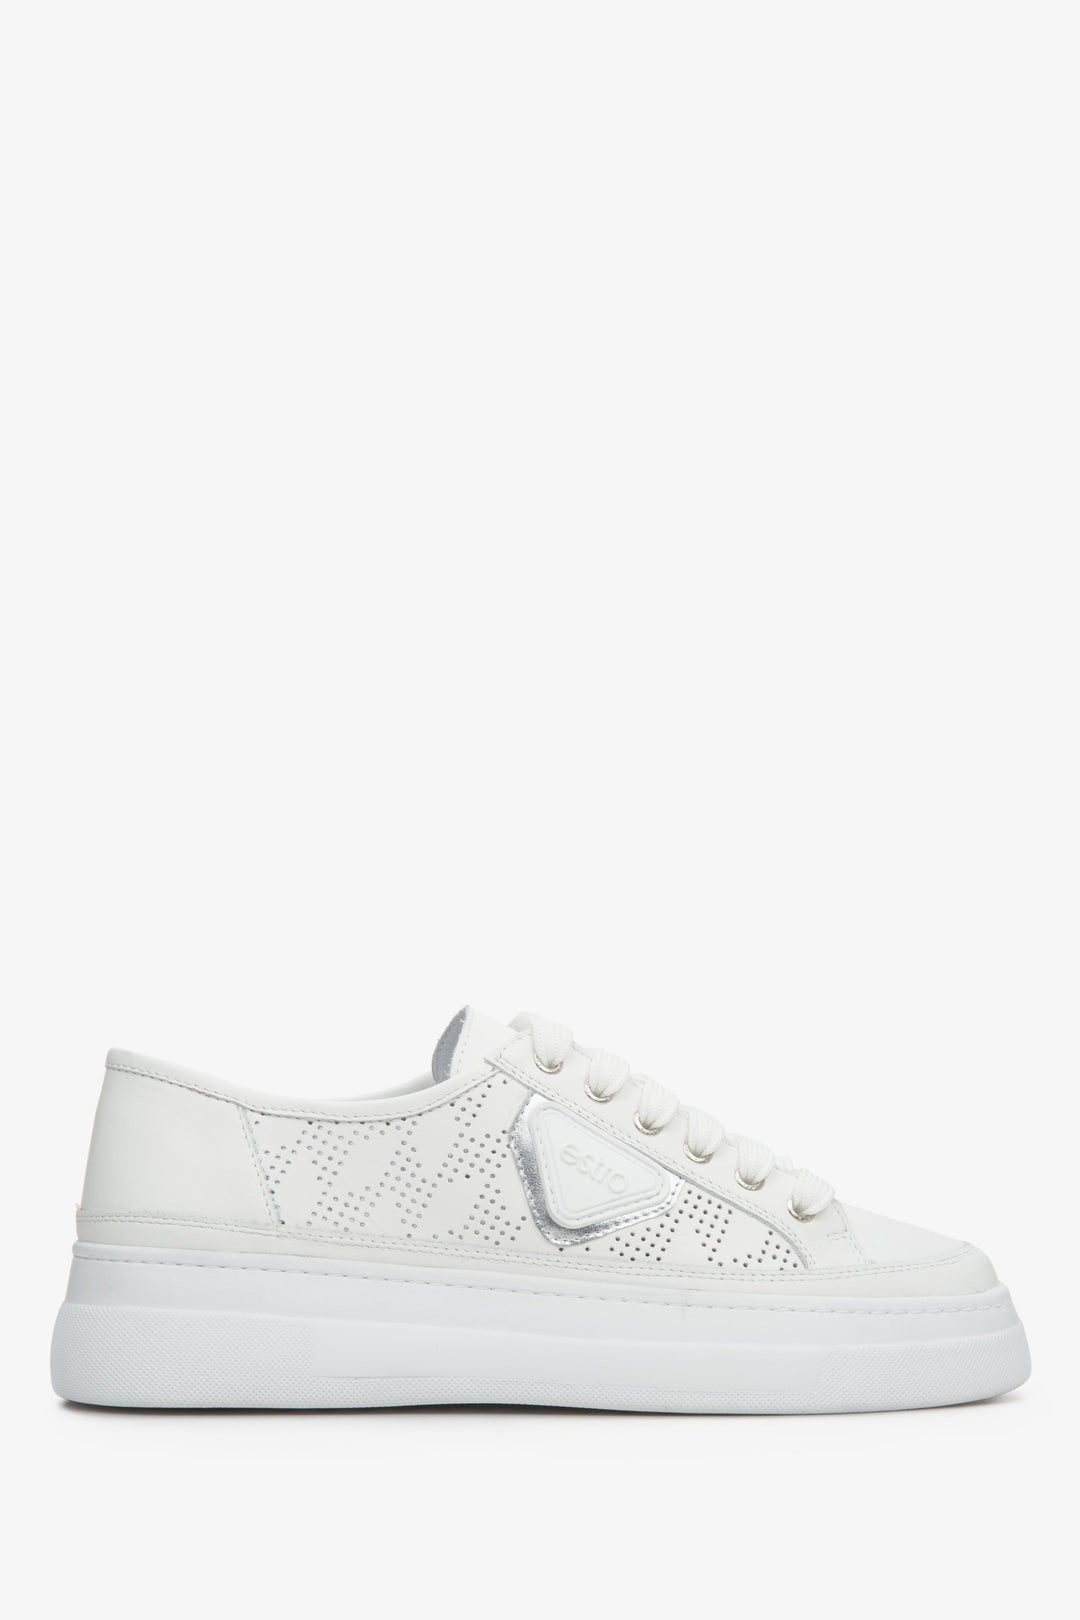 Women's White Leather Sneakers with Perforation for Summer Estro ER00112847.